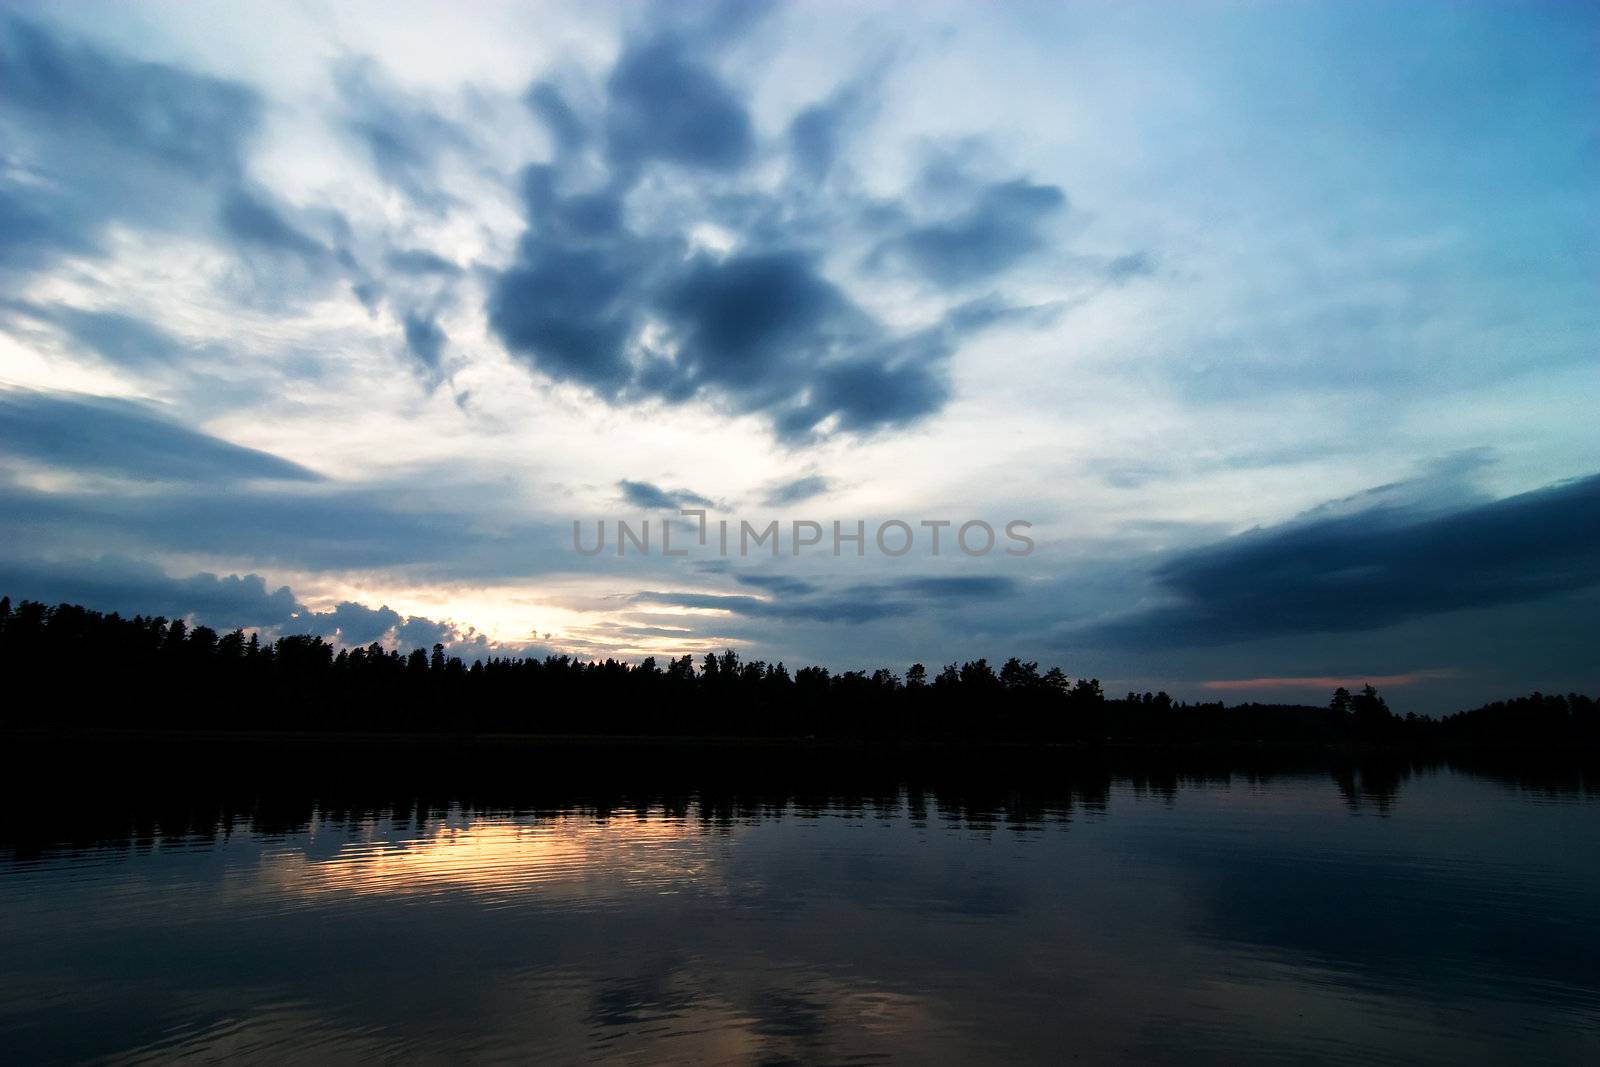 A lake in the evening with a dramtic sky with clodus